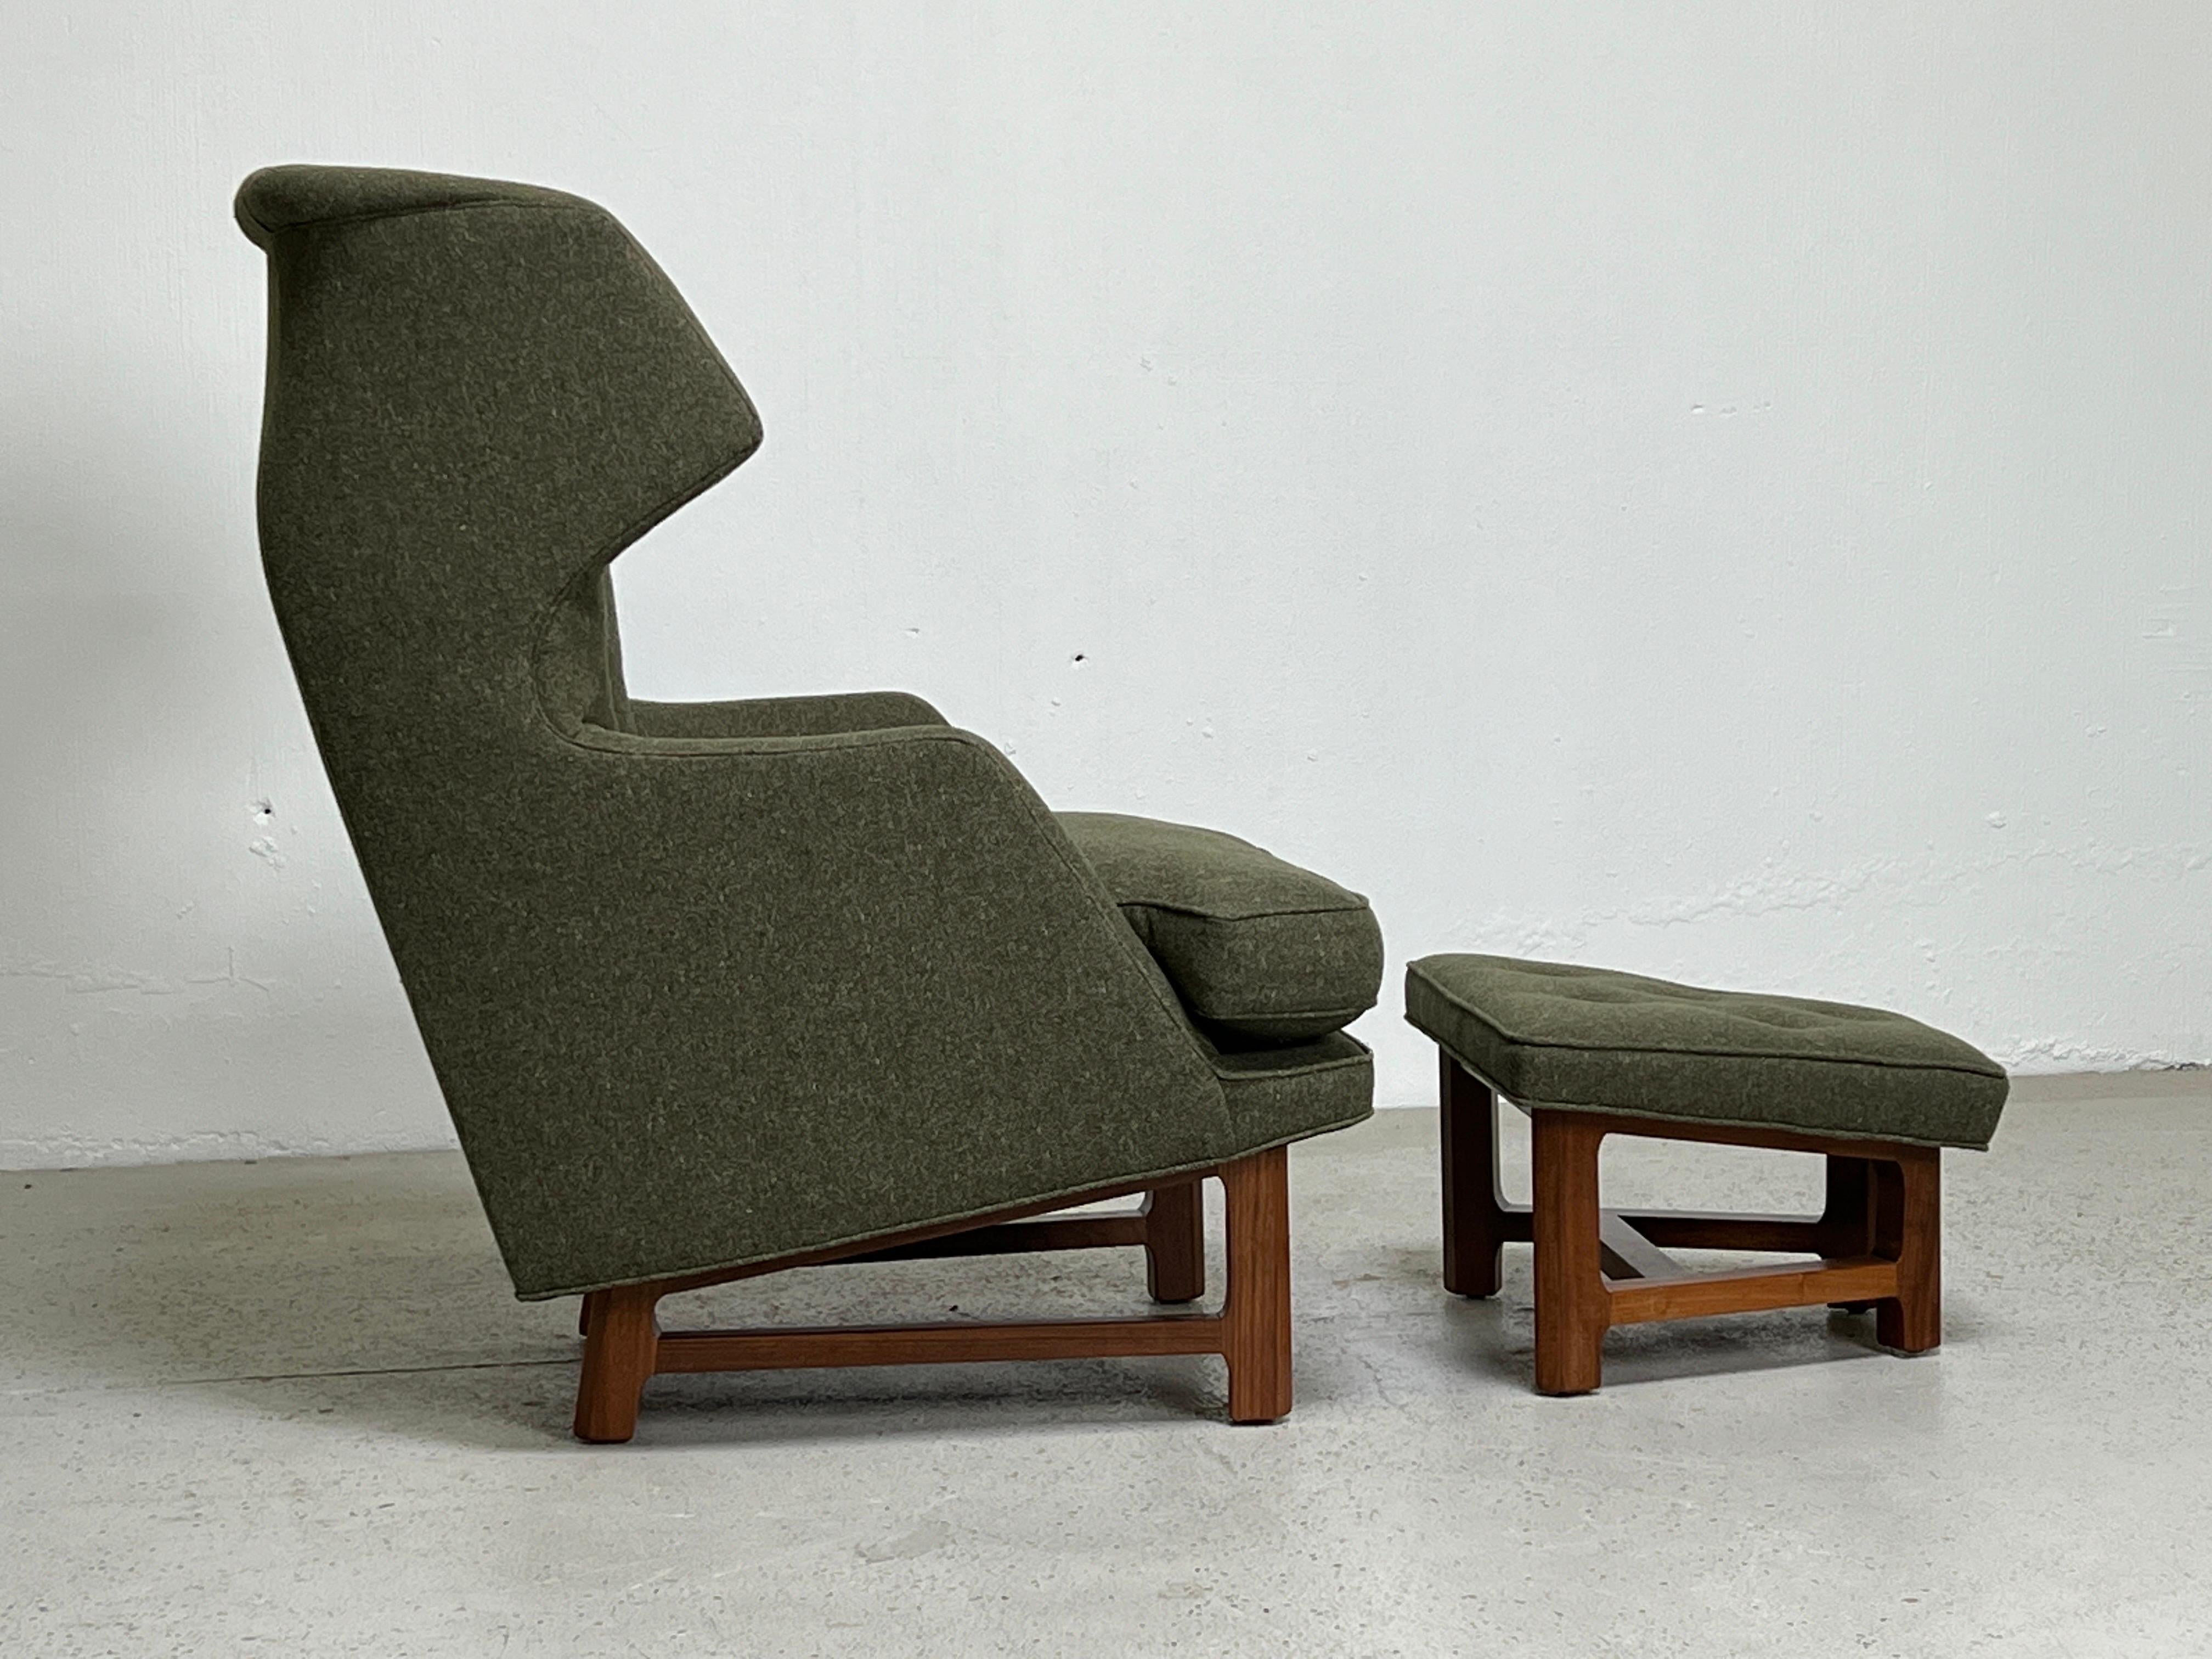 Edward Wormley for Dunbar Janus wing chair and ottoman with walnut bases. Reupholstered in Knoll Melange wool / Sprout. Down seat cushion.